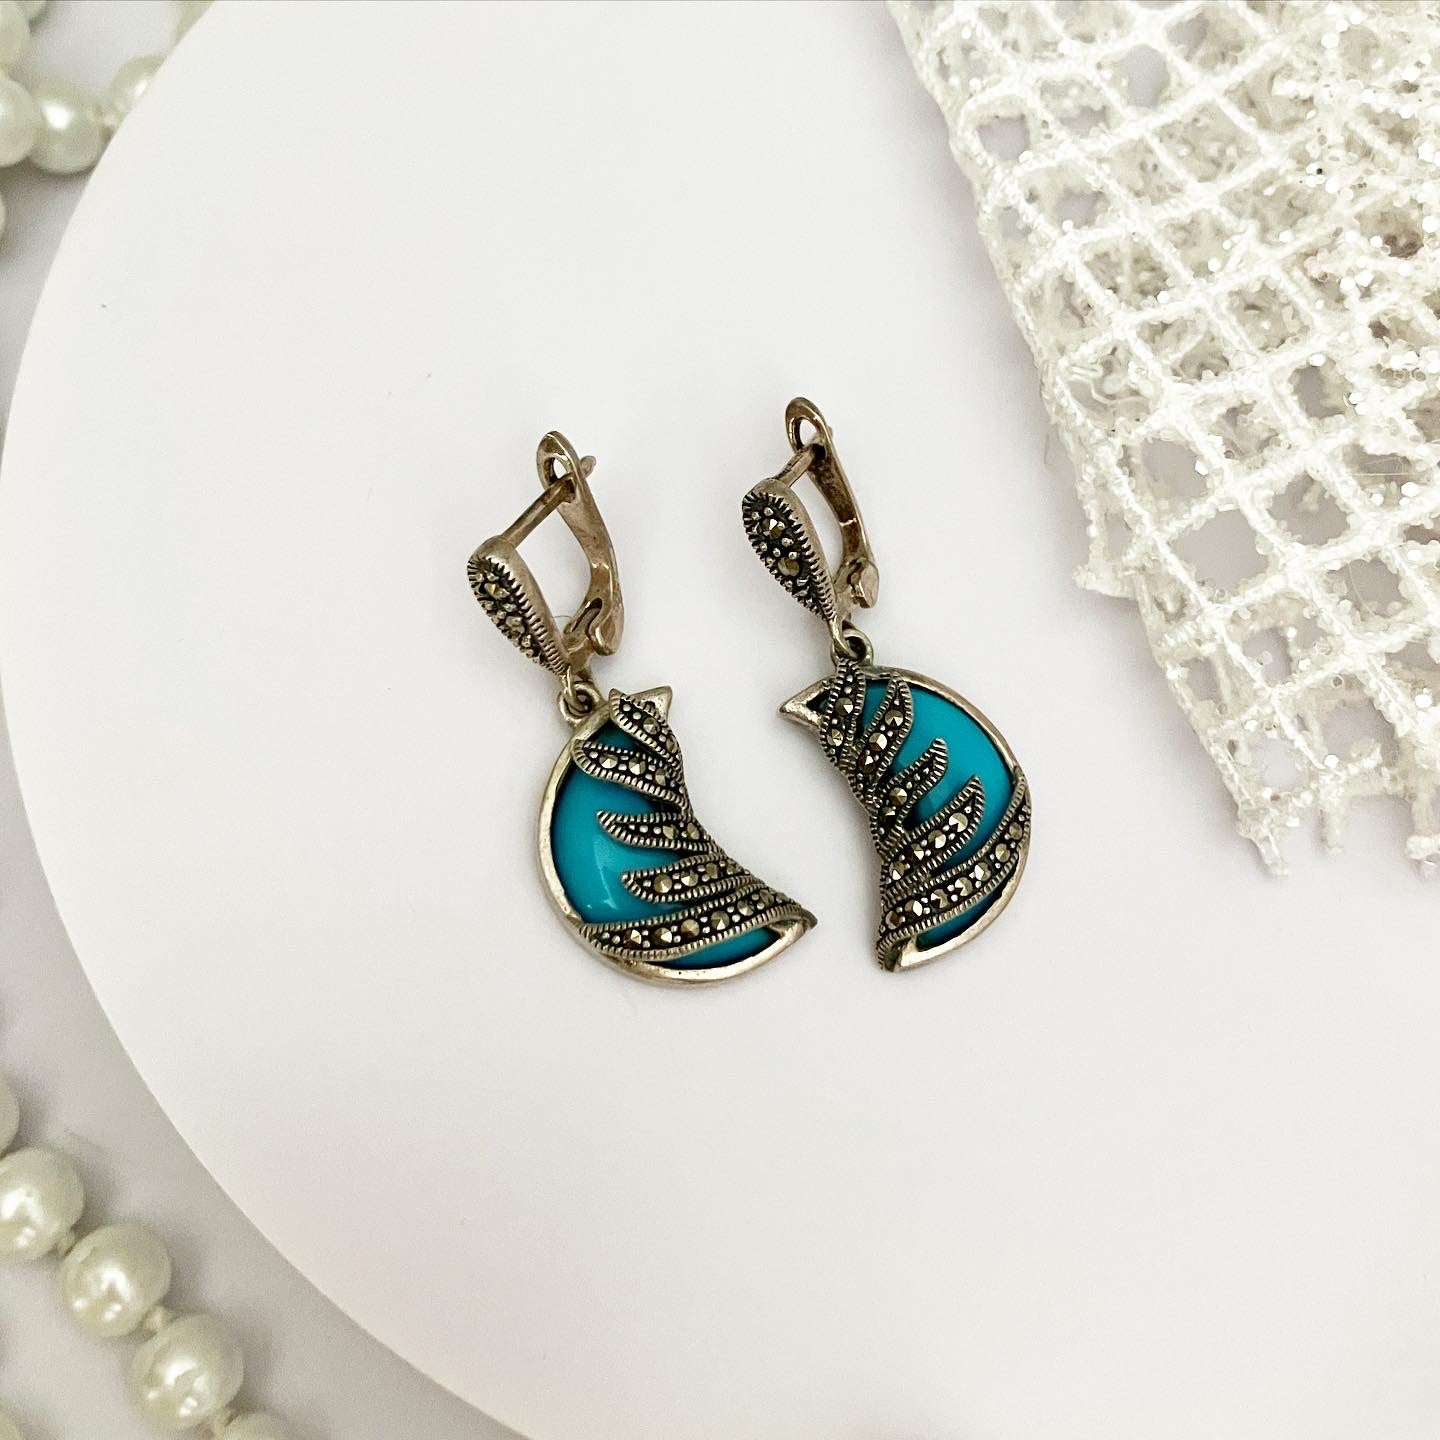 Kit; earrings and pendant silver 925 samples with turquoise "Heavenly turquoise"